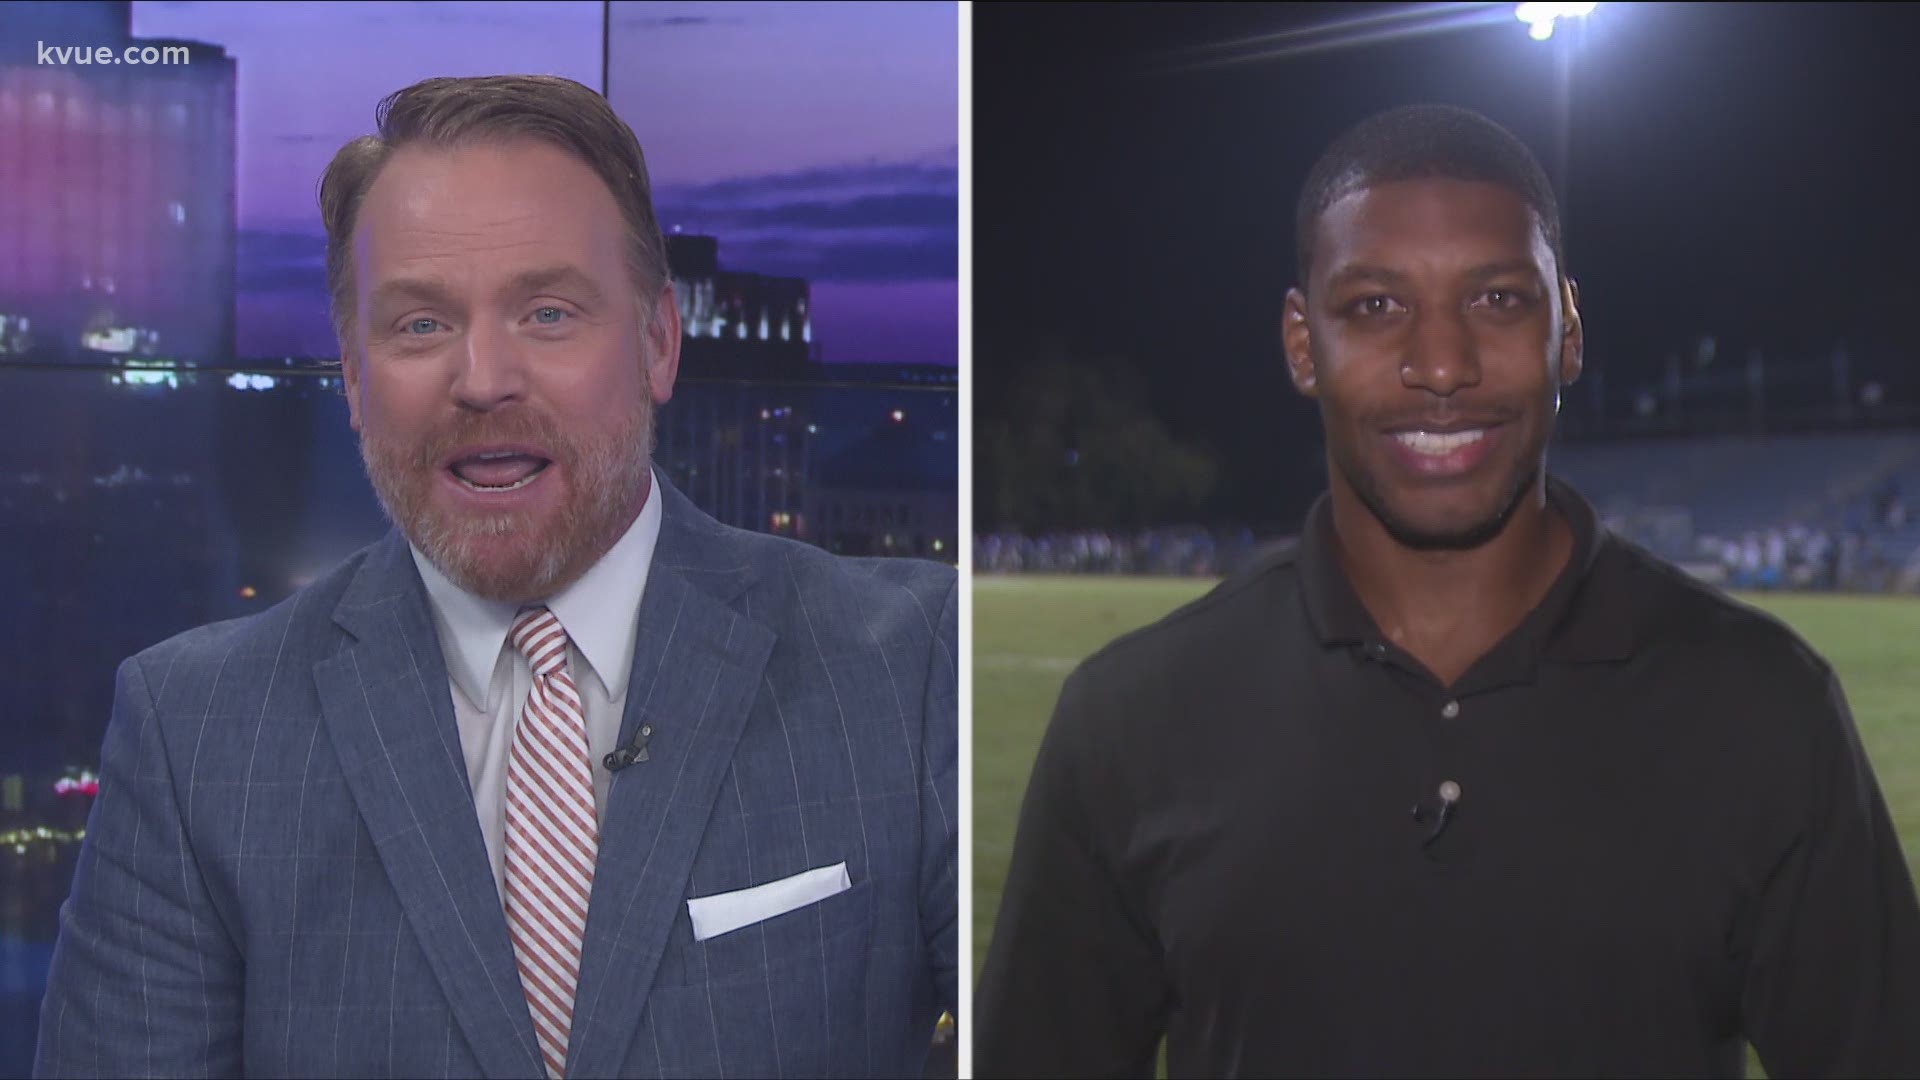 Catch the latest scores and highlights from tonight's high school football games with the KVUE Sports team.